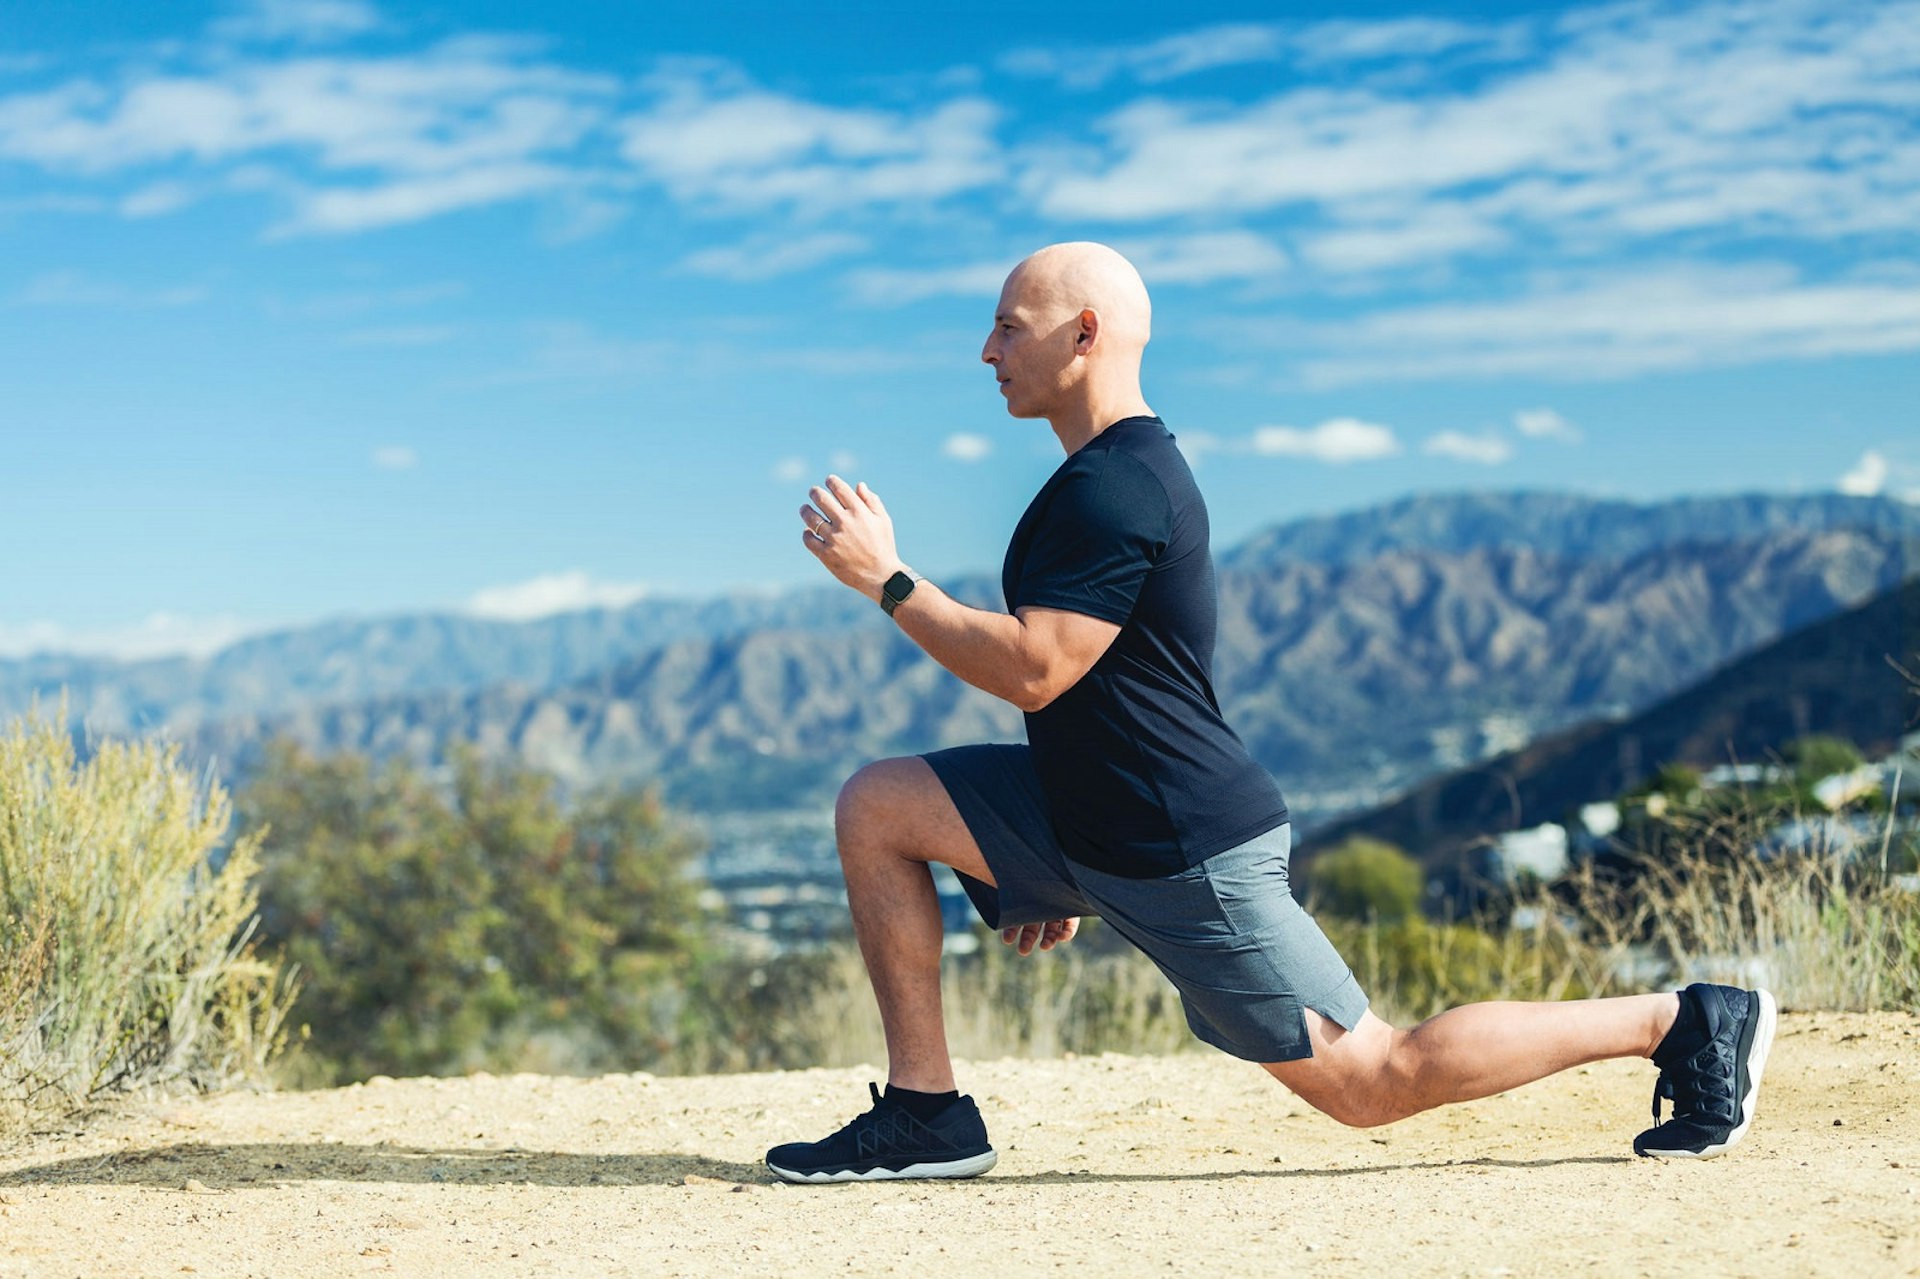 Lifestyle Photo of Harley Pasternak wearing a Fitbit watch. Harley is doing a reverse lunge on a hiking path with panoramic views of hills in the background